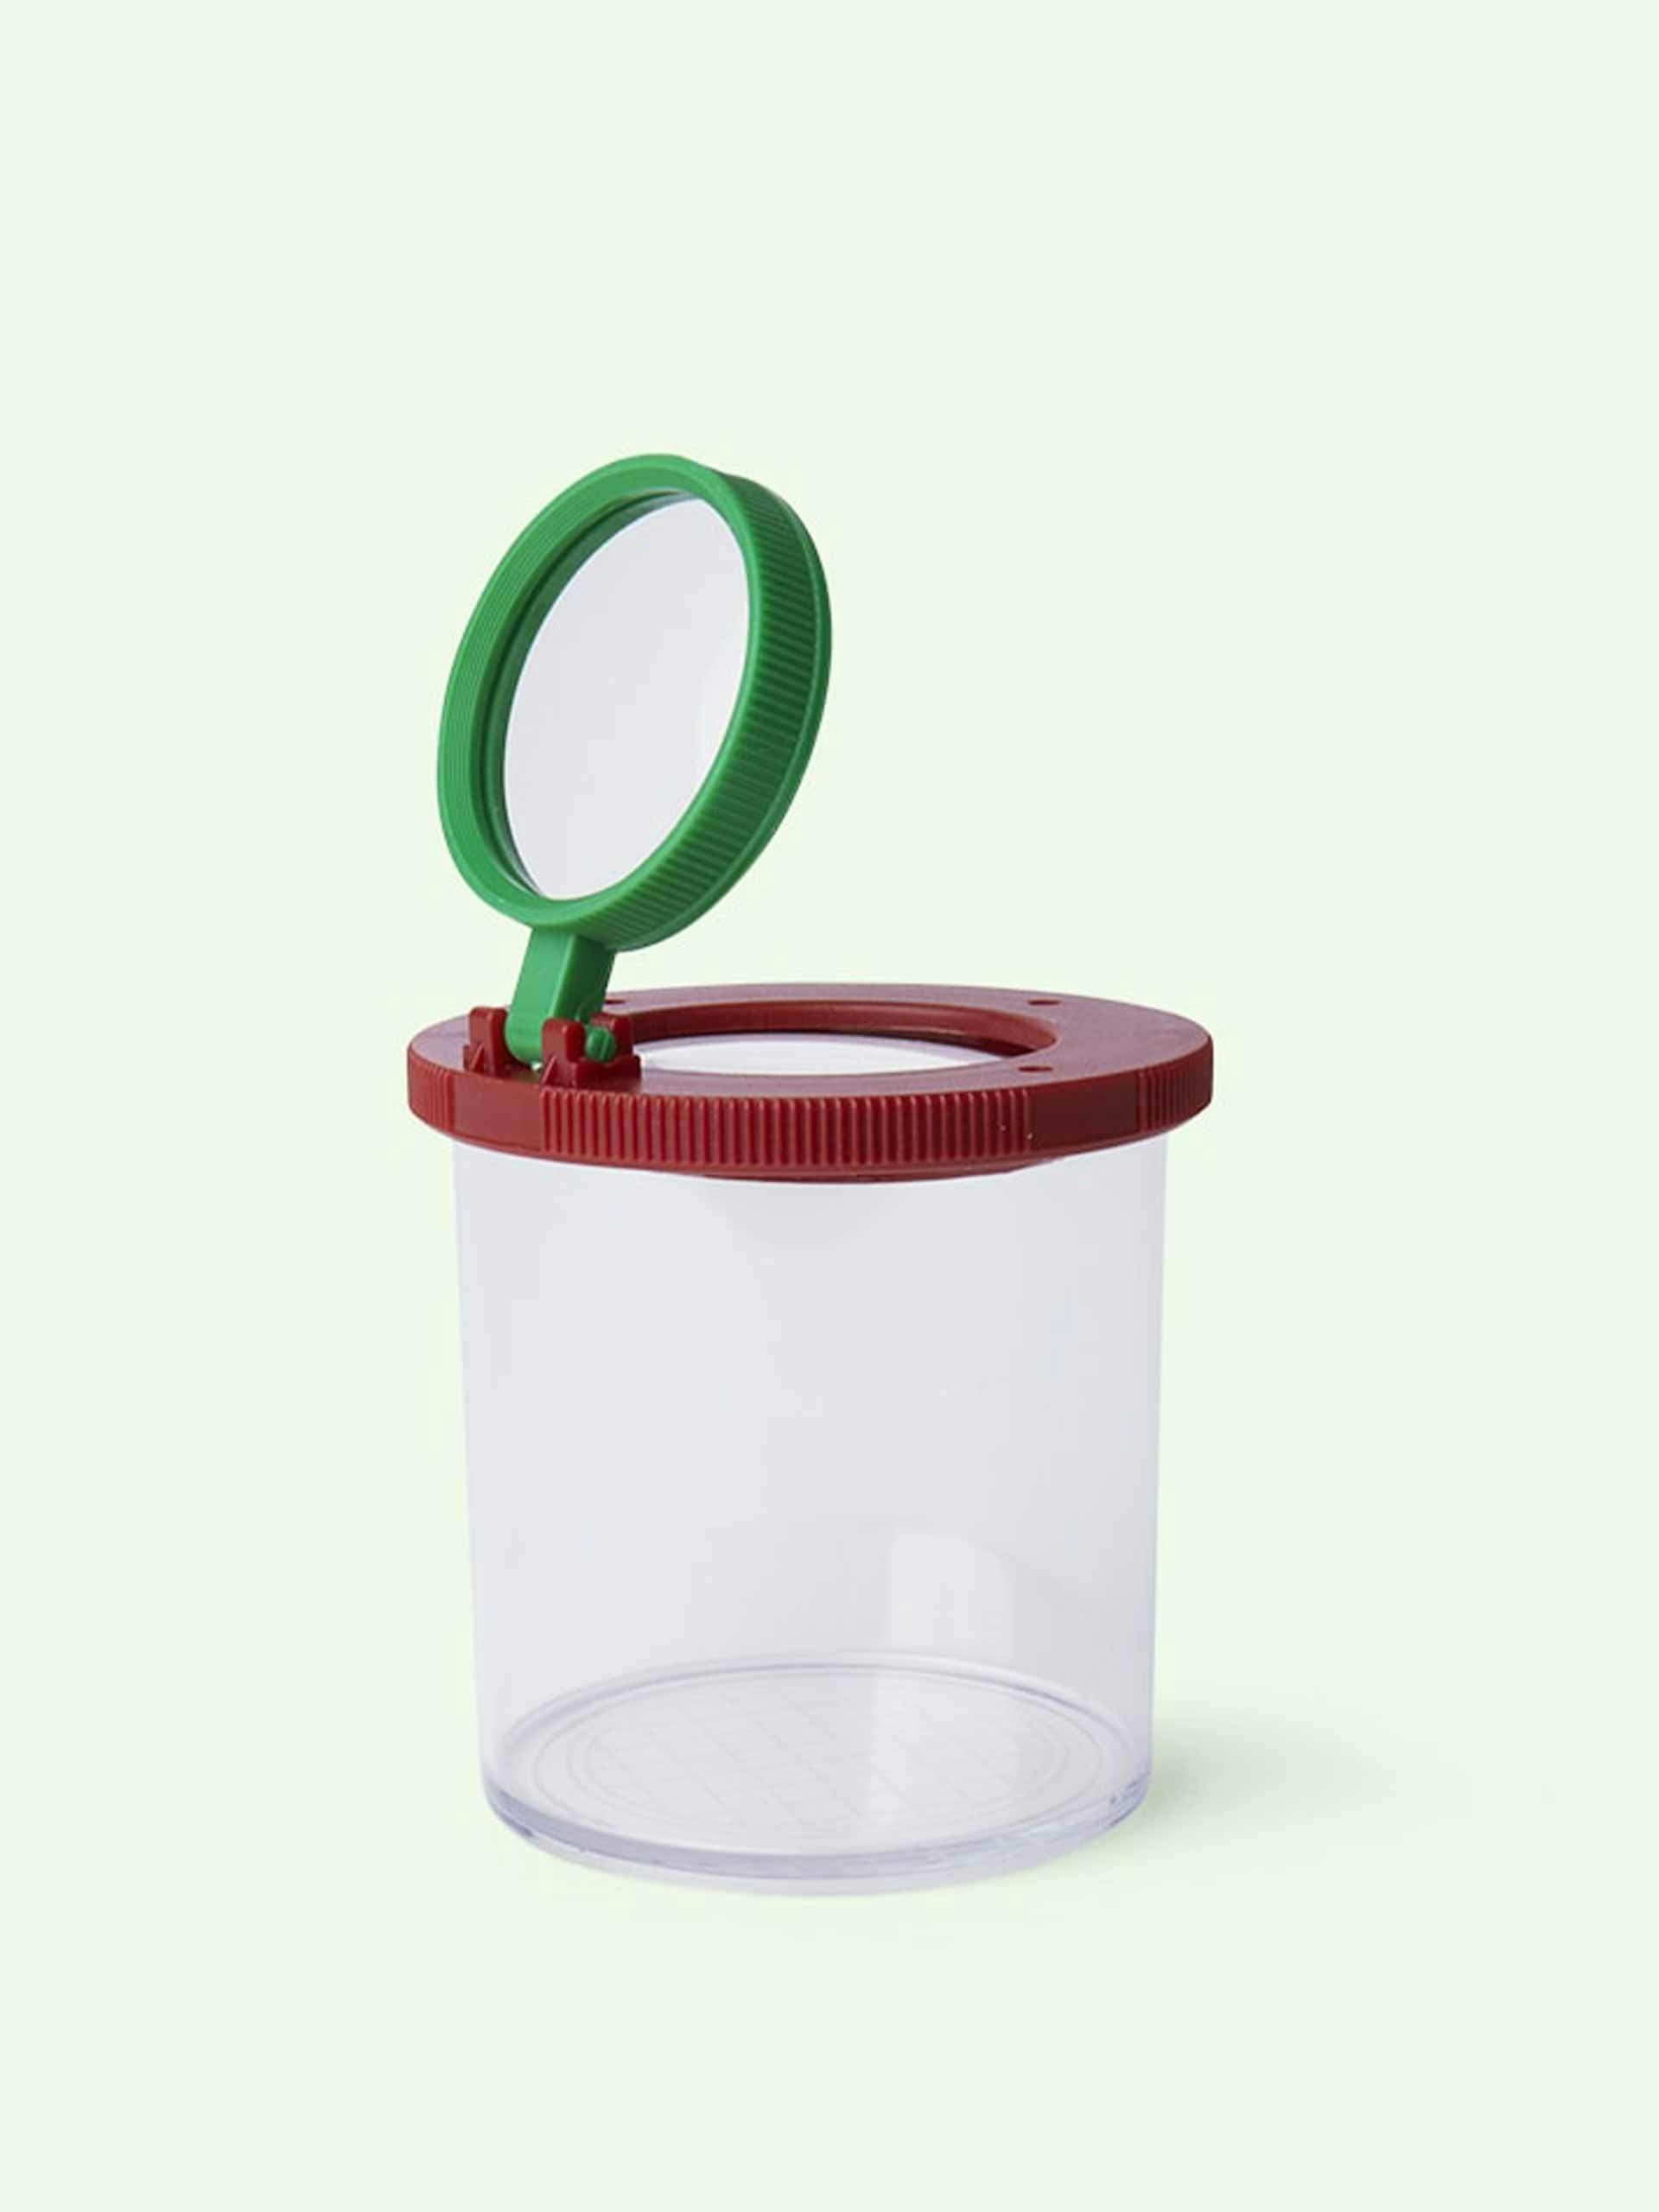 Insect magnifier